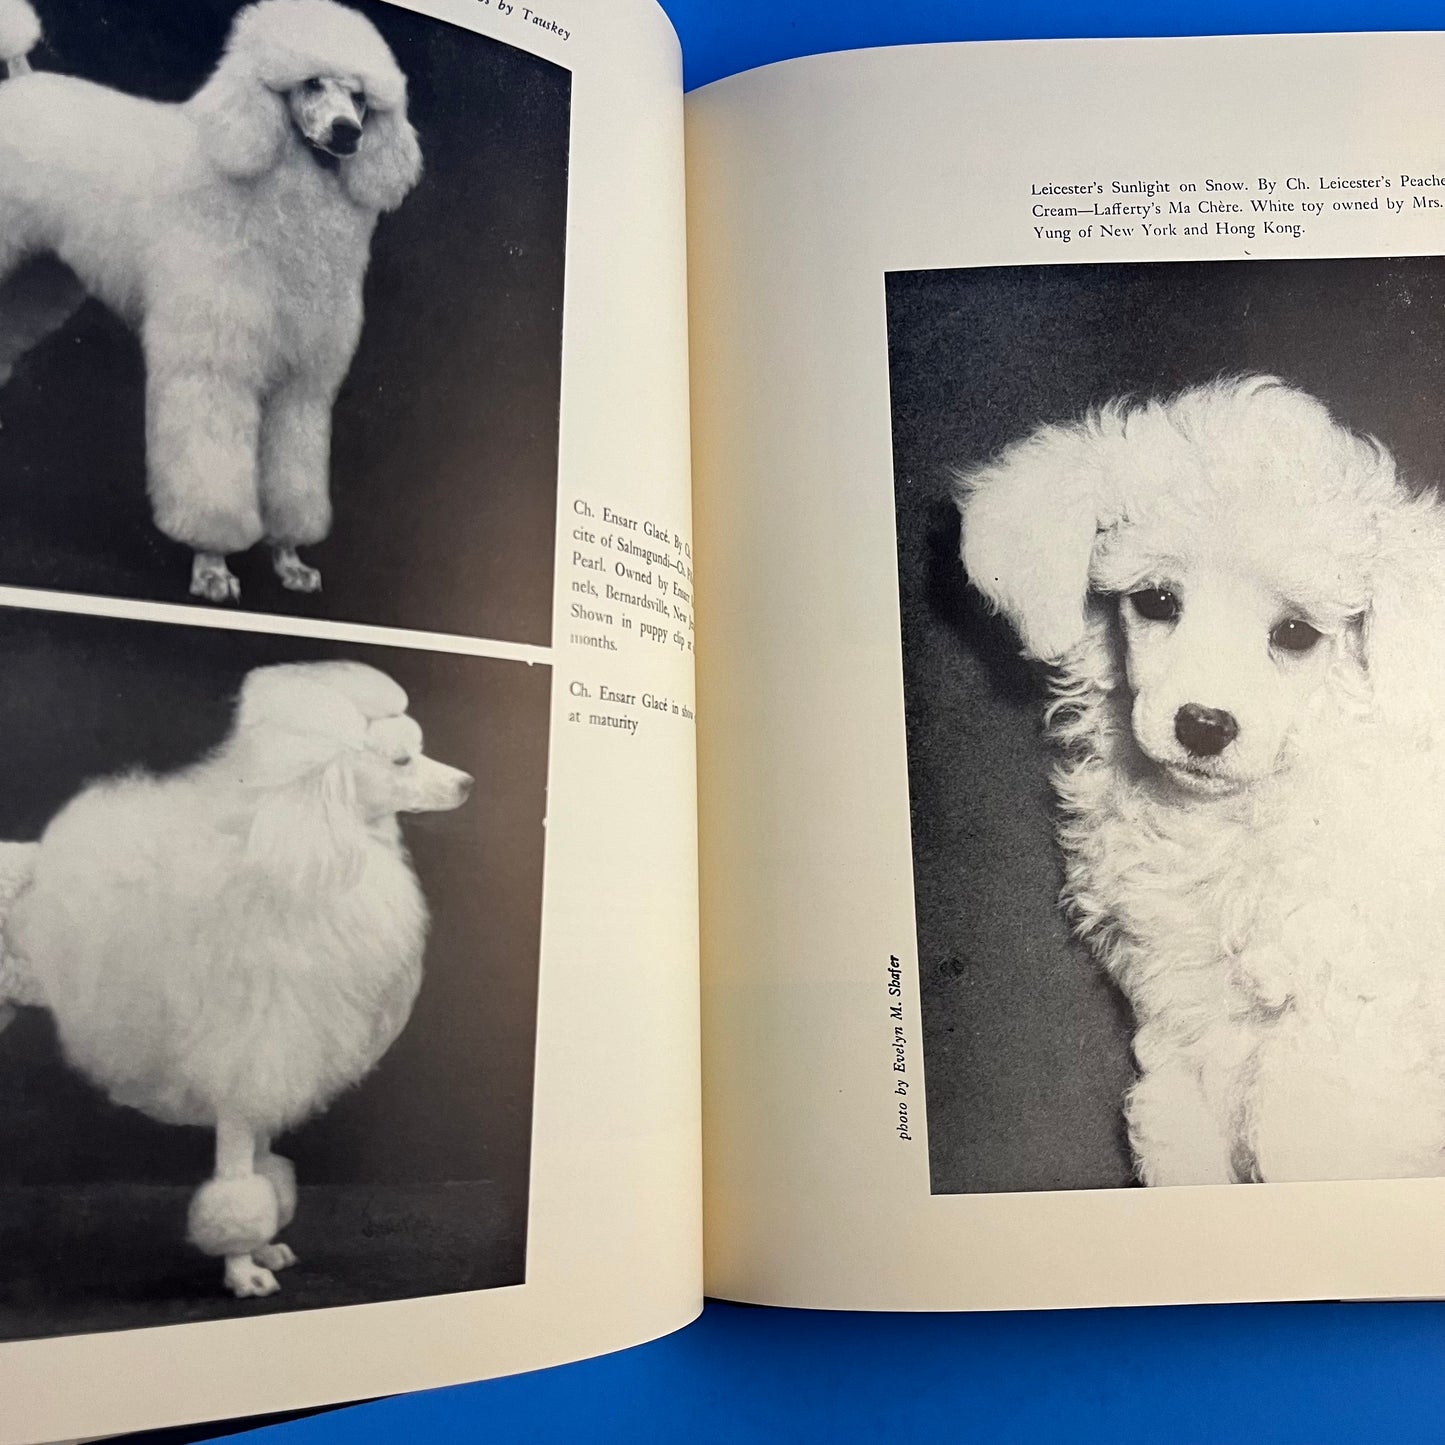 The Book of the Poodle